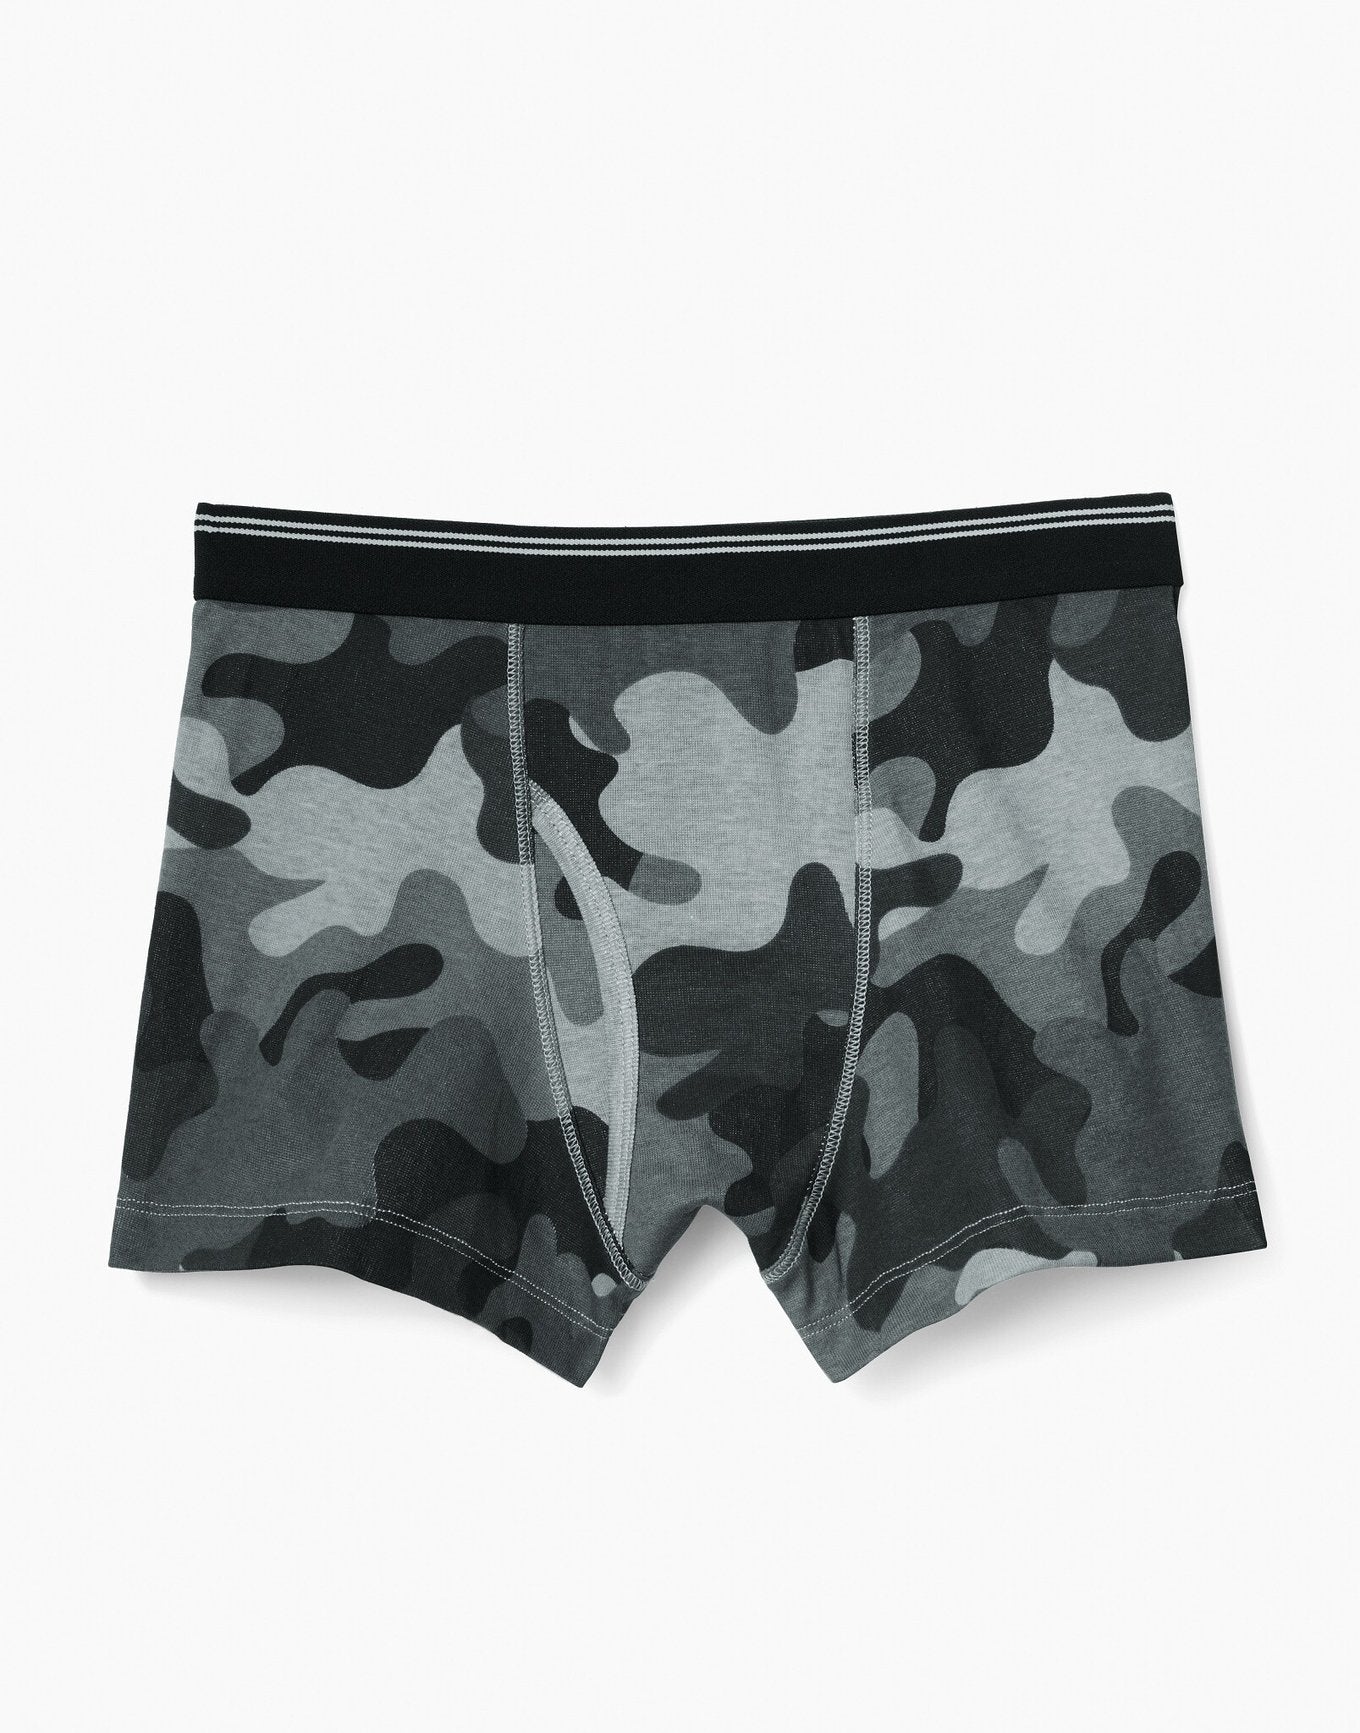 Outlines Kids James in color Black Camo and shape boxer